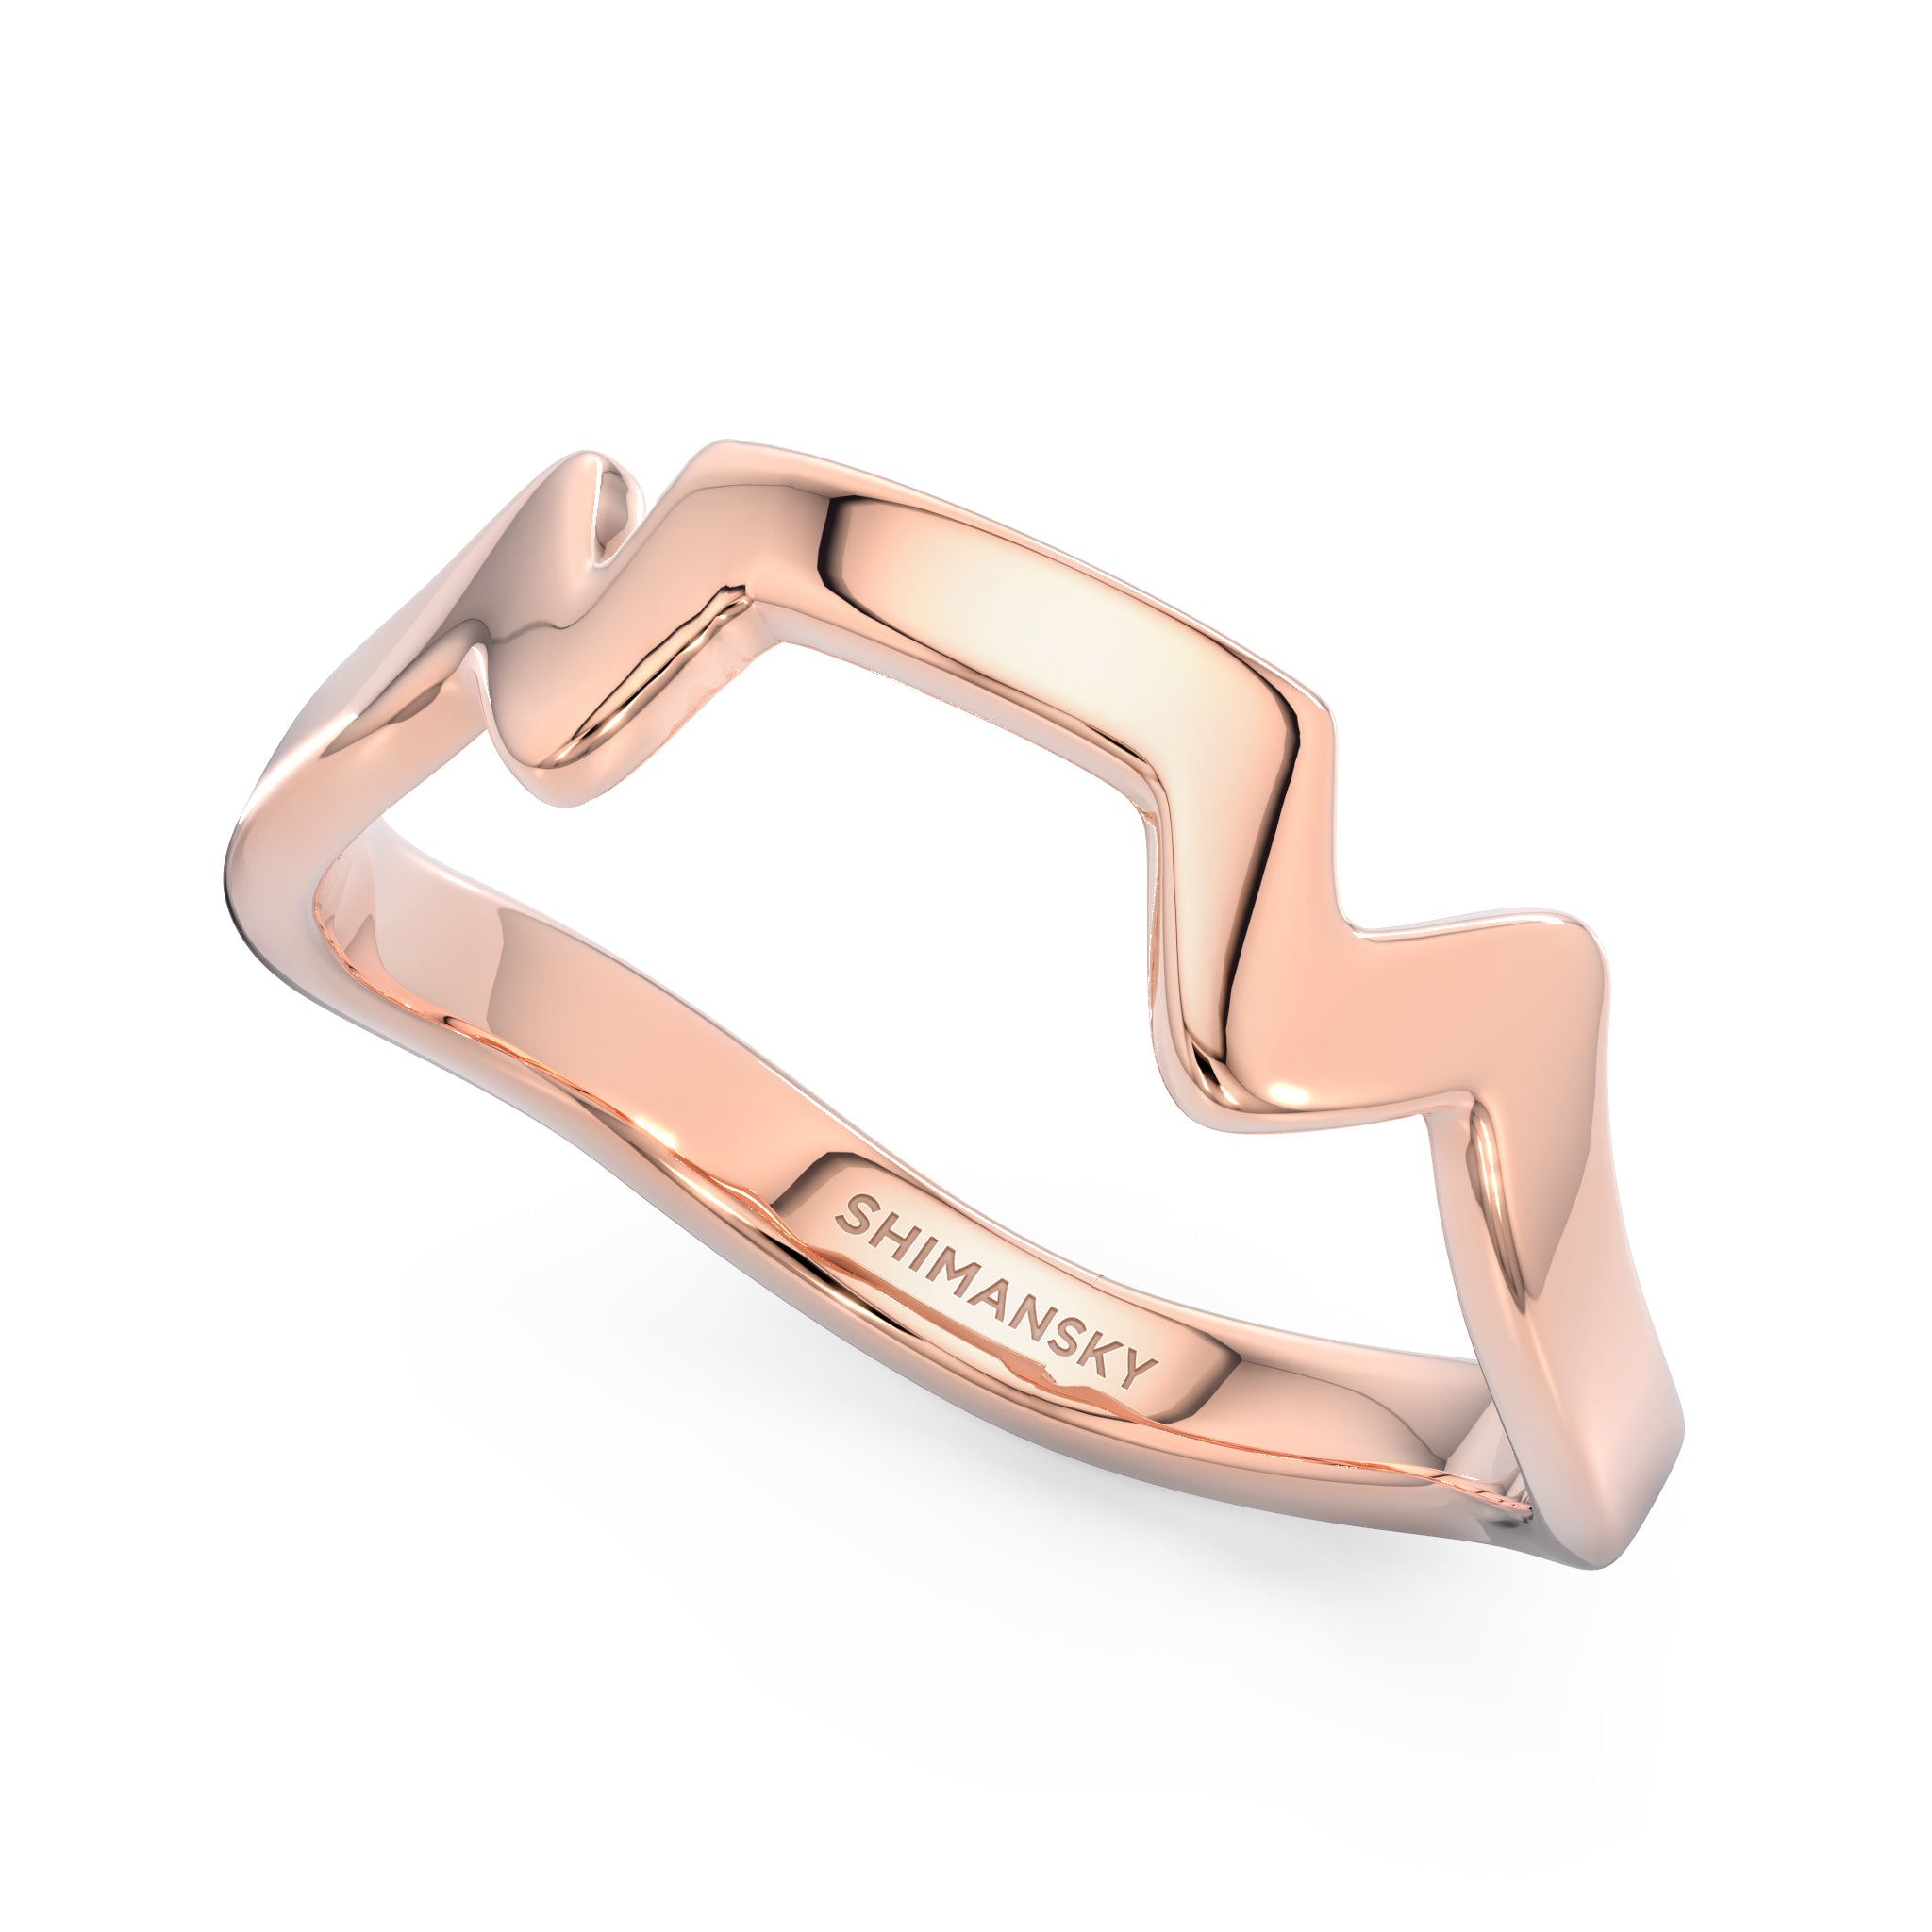 Shimansky - Table Mountain Ring Crafted in 14K Rose Gold